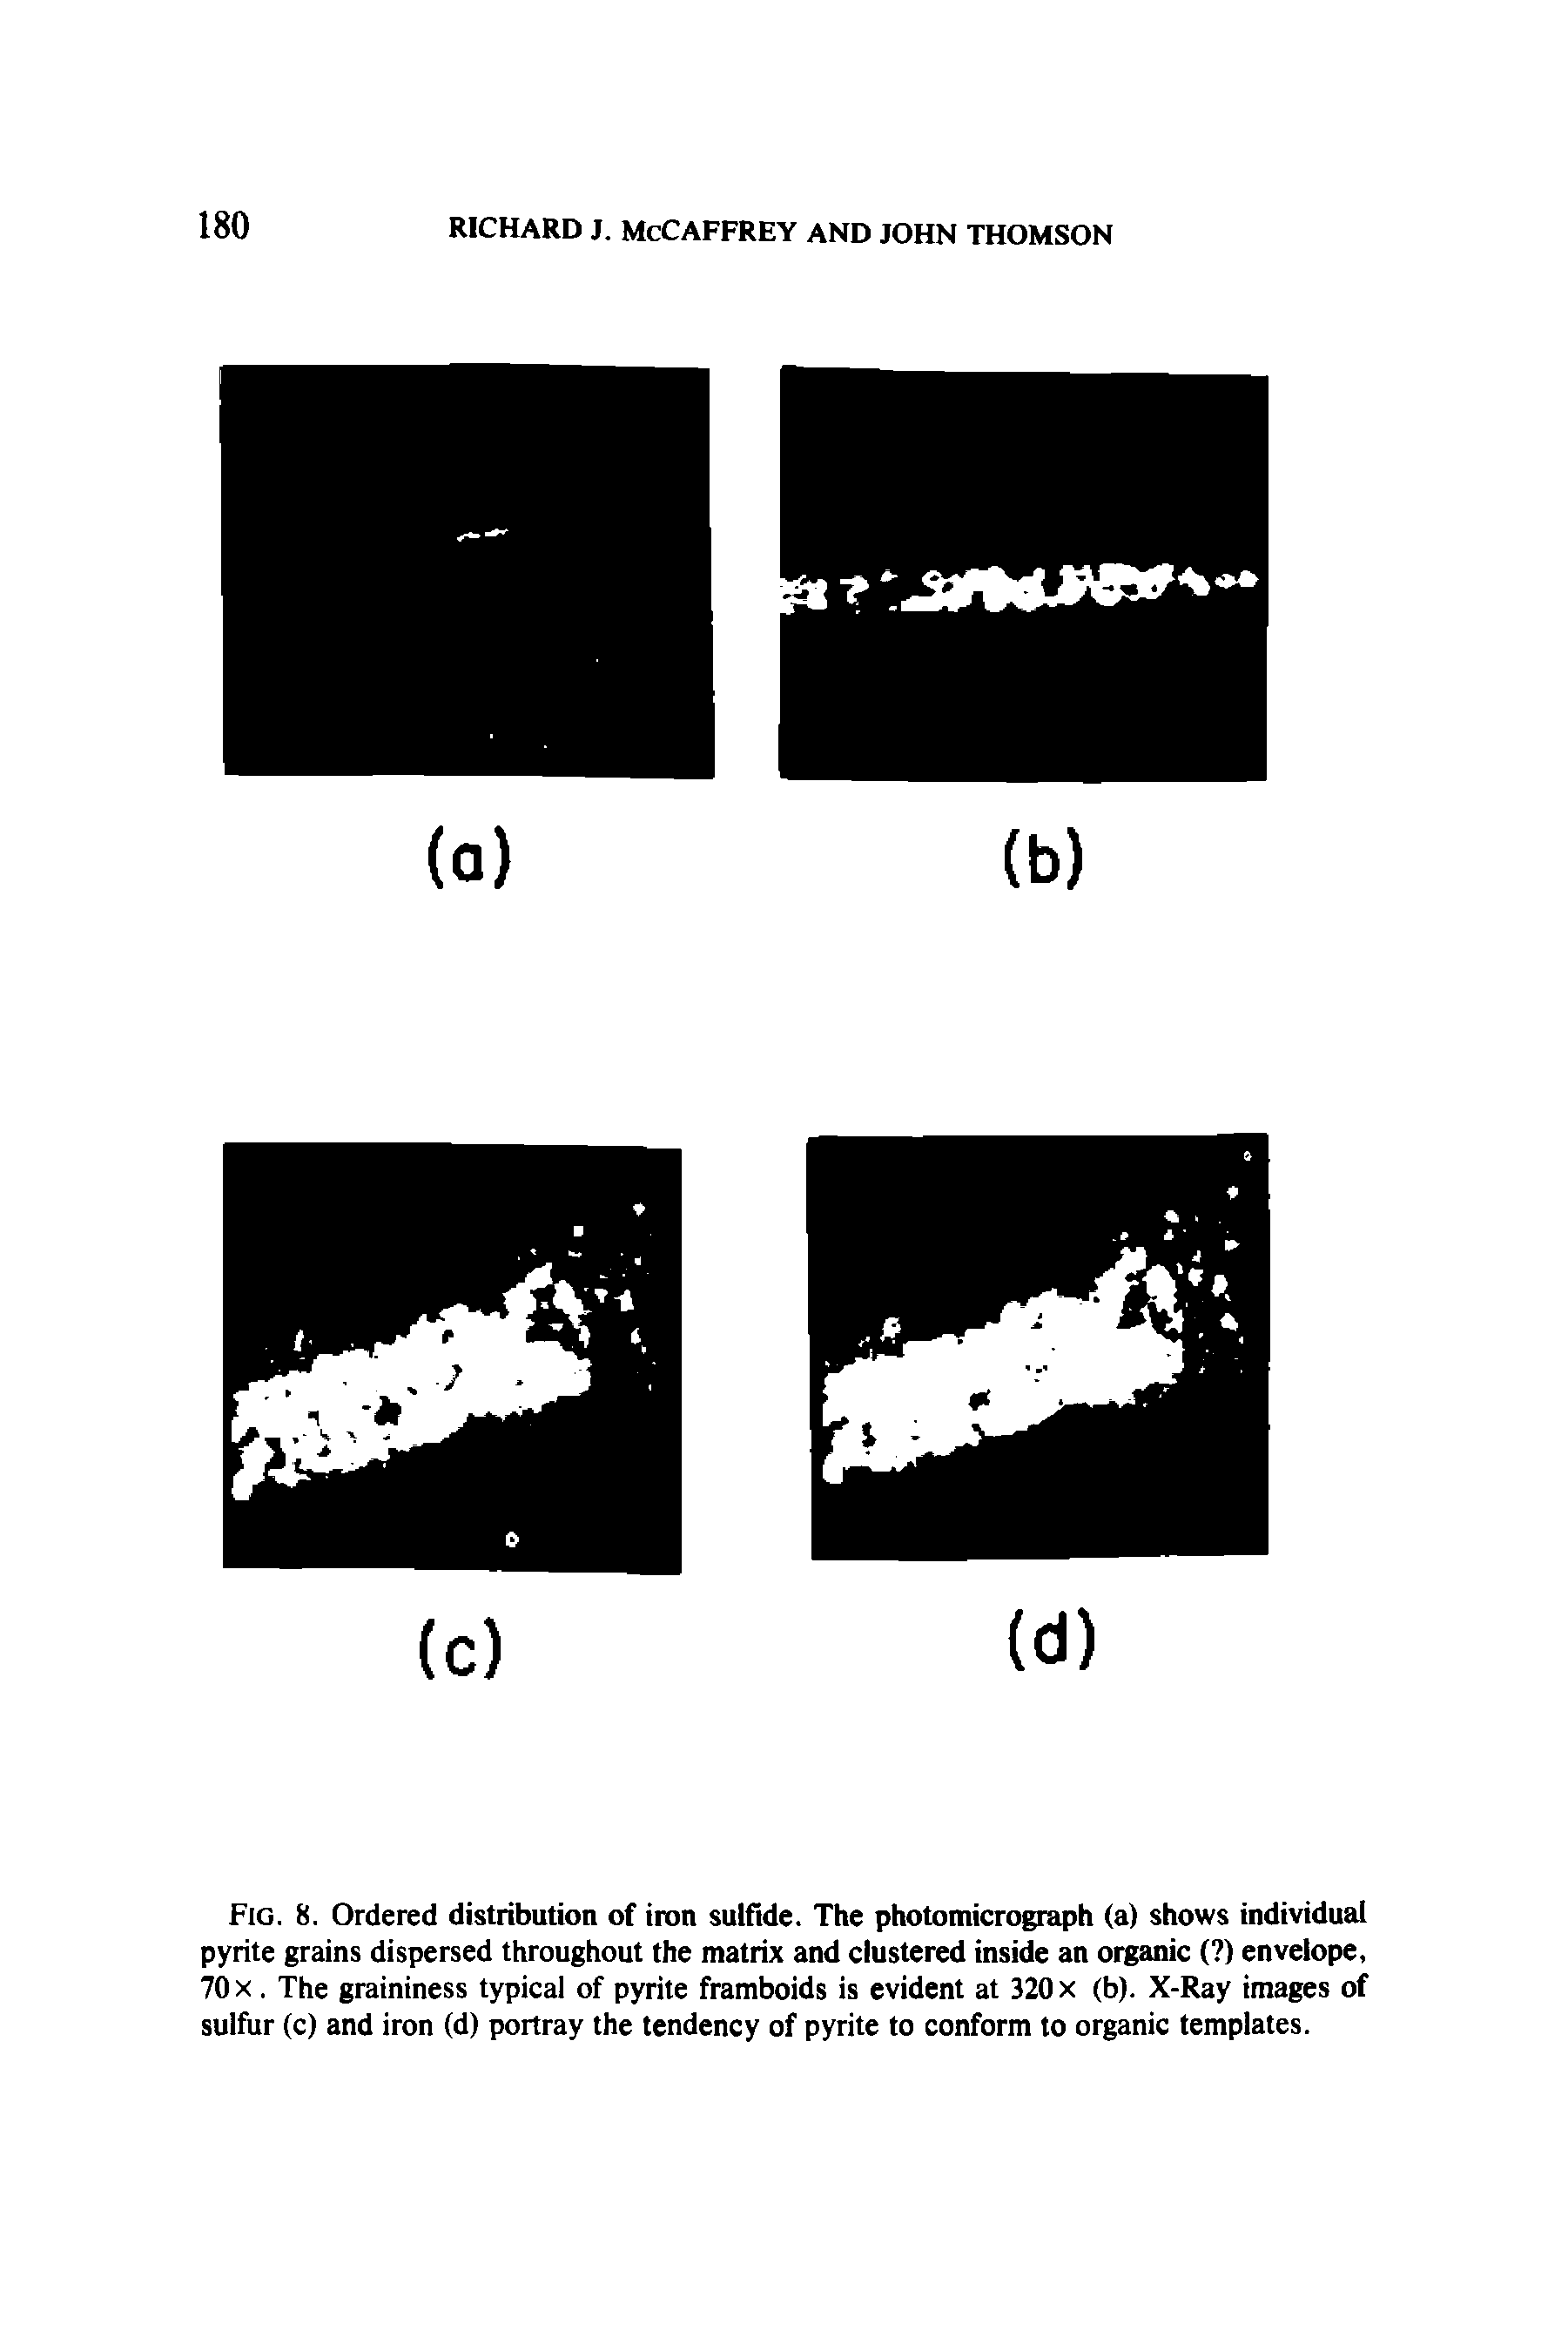 Fig. 8. Ordered distribution of iron sulfide. The photomicrograph (a) shows individual pyrite grains dispersed throughout the matrix and clustered inside an organic ( ) envelope, 70 X. The graininess typical of pyrite framboids is evident at 320 x (b). X-Ray images of sulfur (c) and iron (d) portray the tendency of pyrite to conform to organic templates.